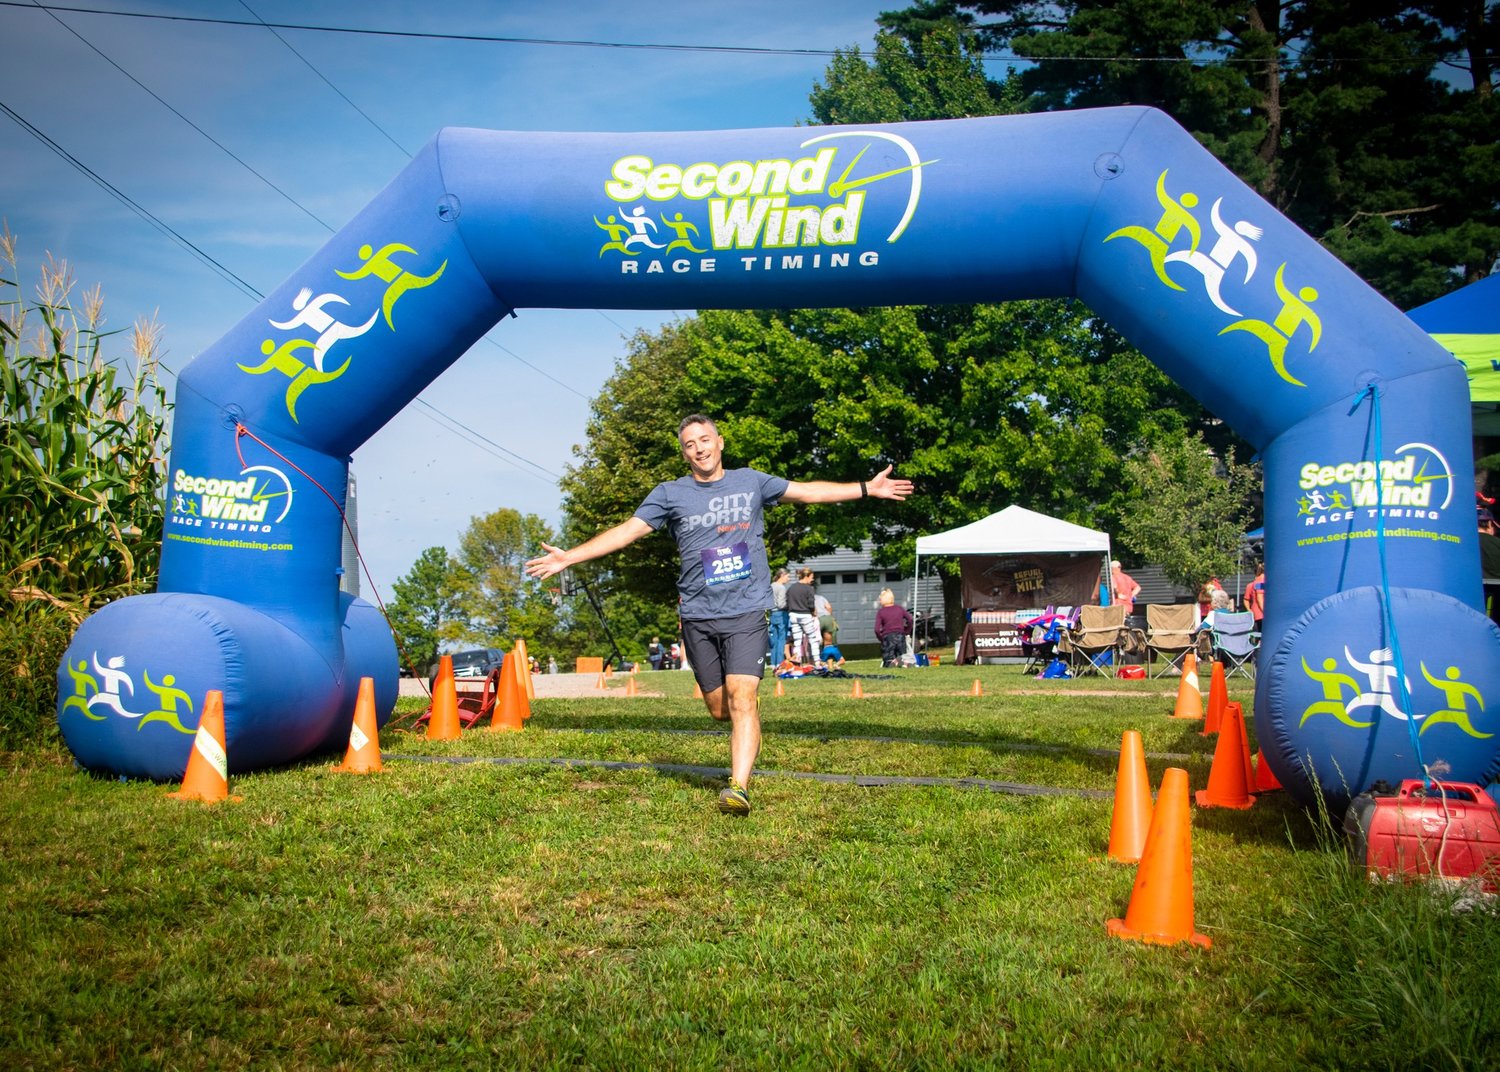 Nearly 300 runners and walkers participated in the race at Highland Farm.